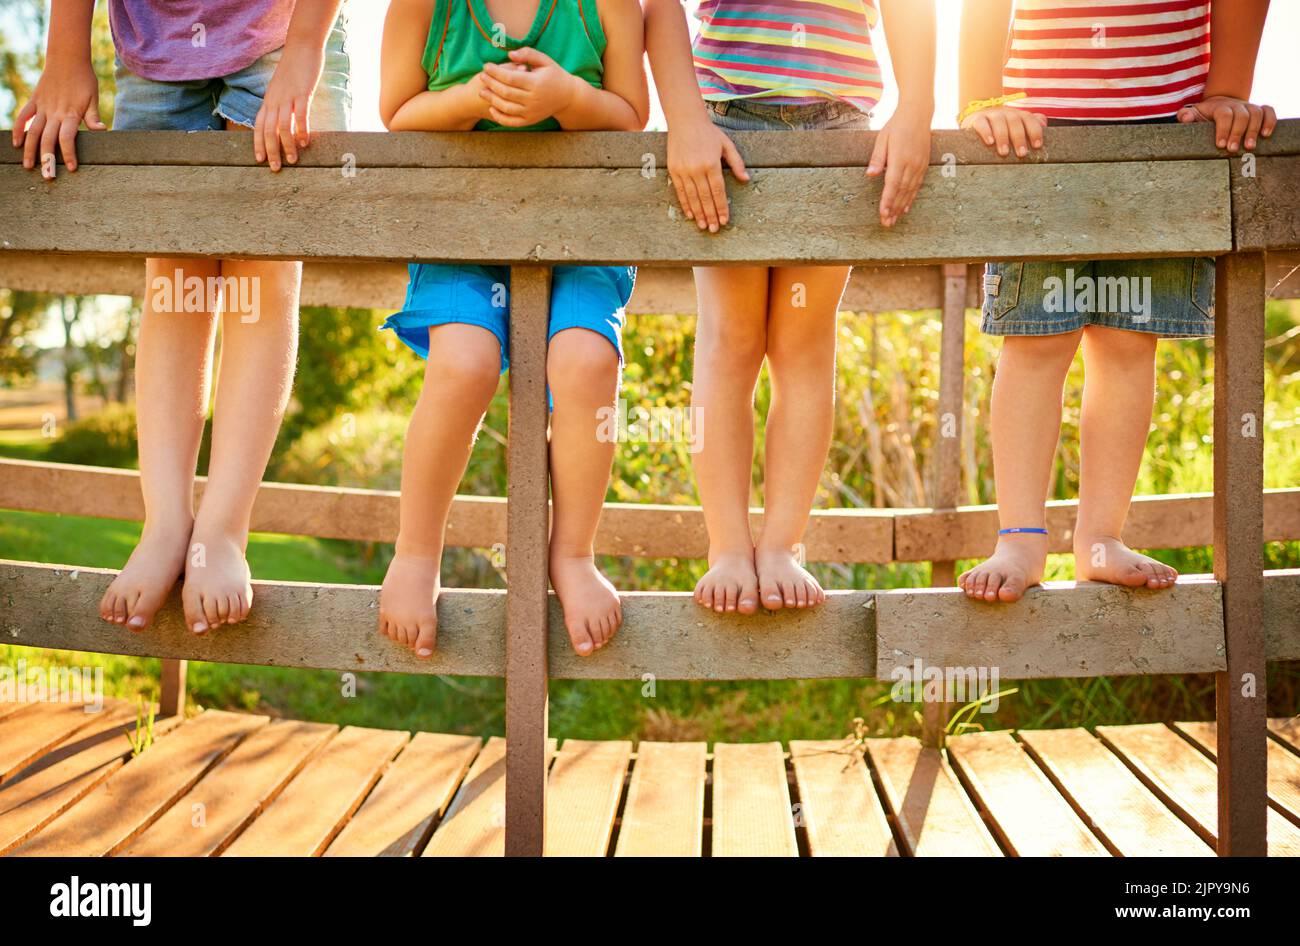 These feet are ready to jump into a day of fun. little kids playing outdoors. Stock Photo